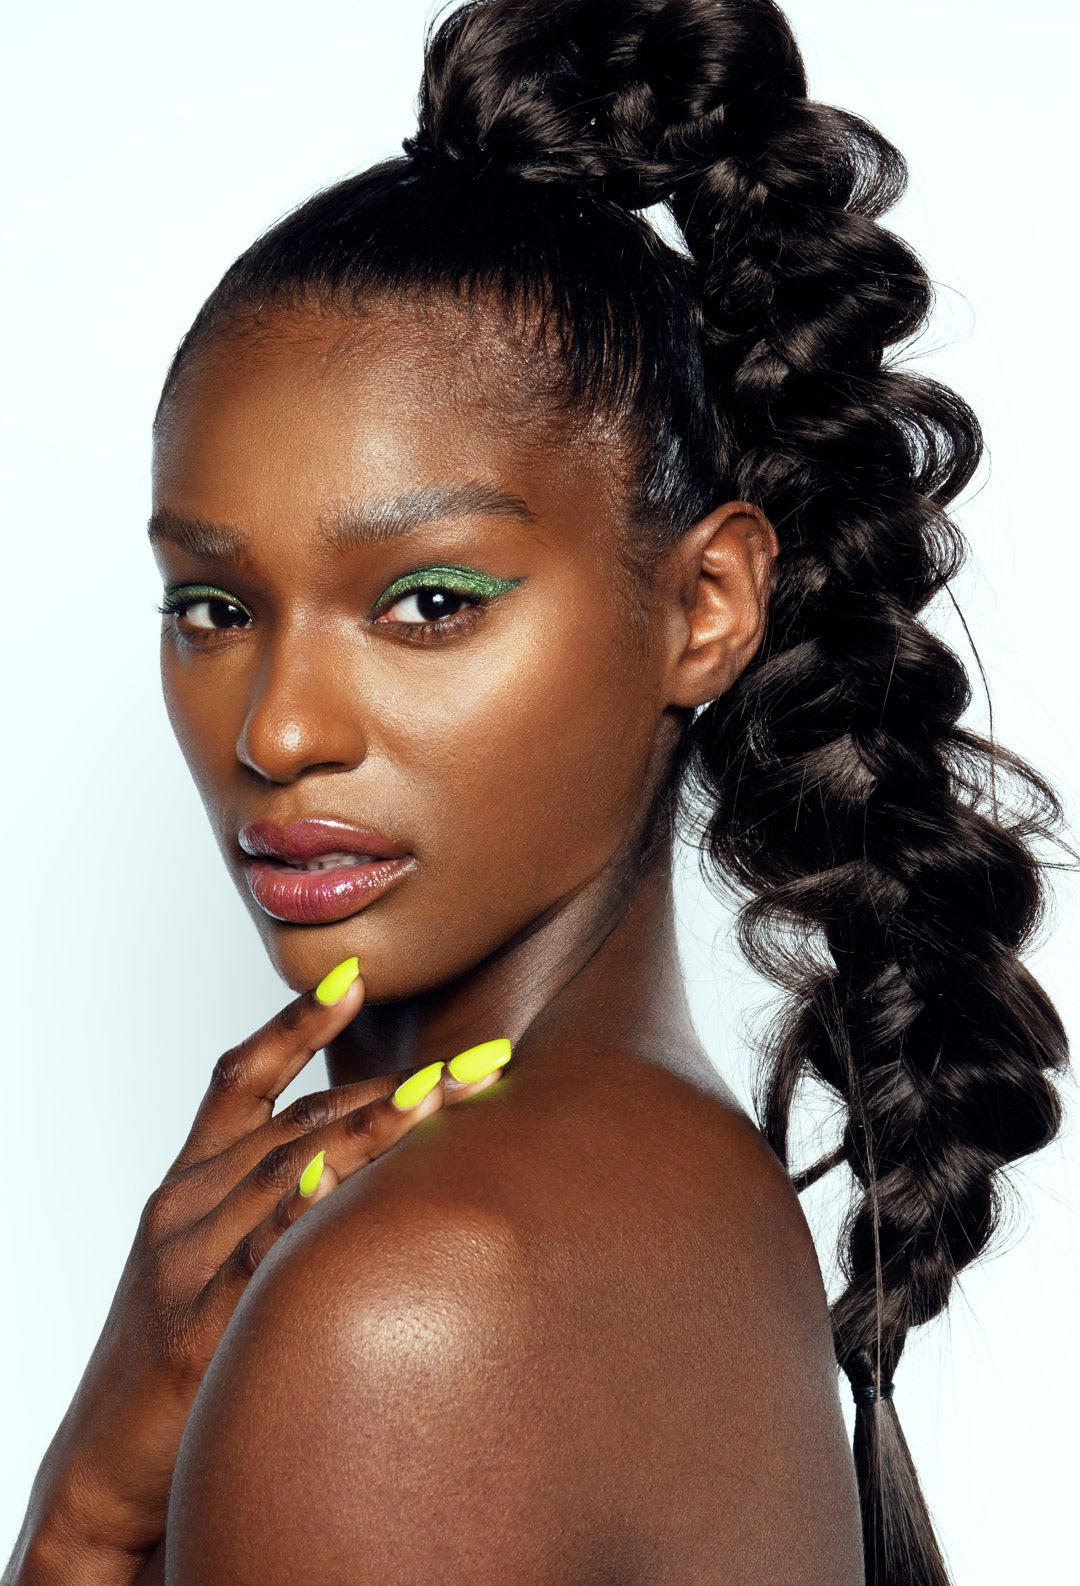 The Teknique Agency Is Putting Top Beauty Creatives On The Map